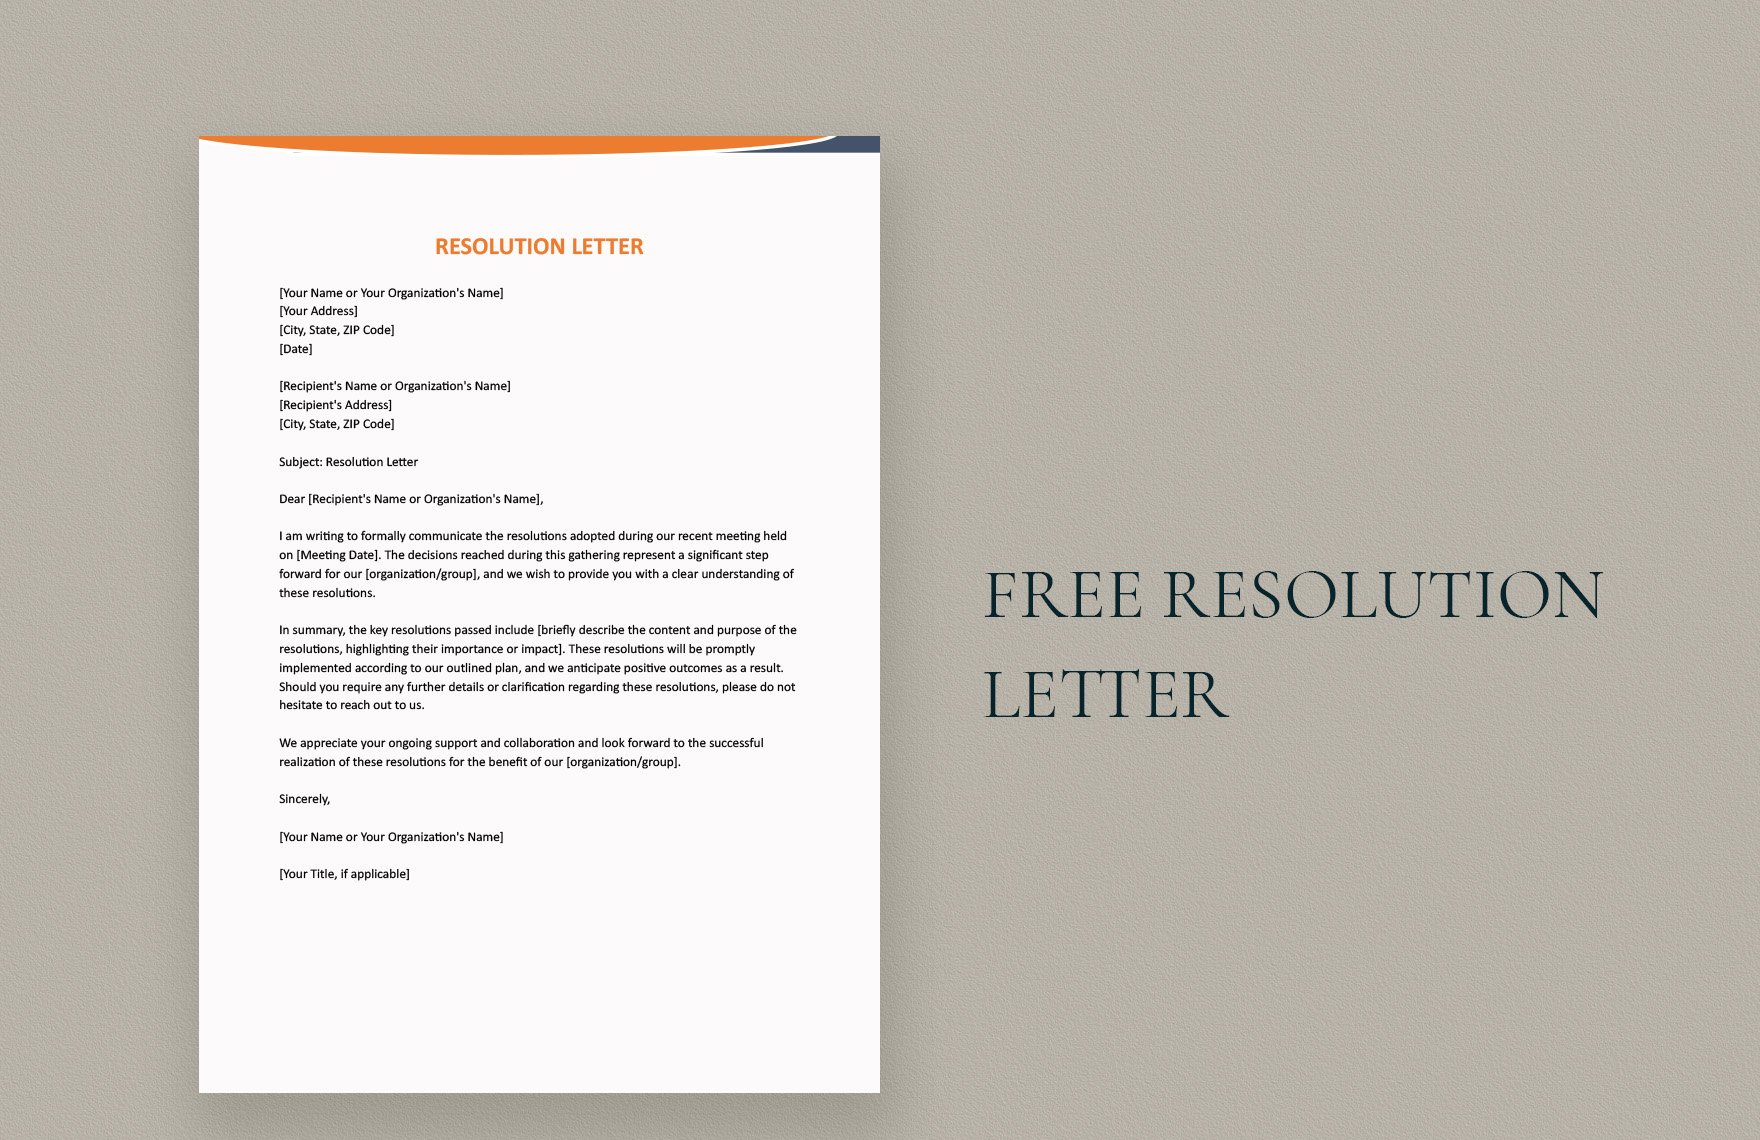 Resolution Letter in Word, Google Docs